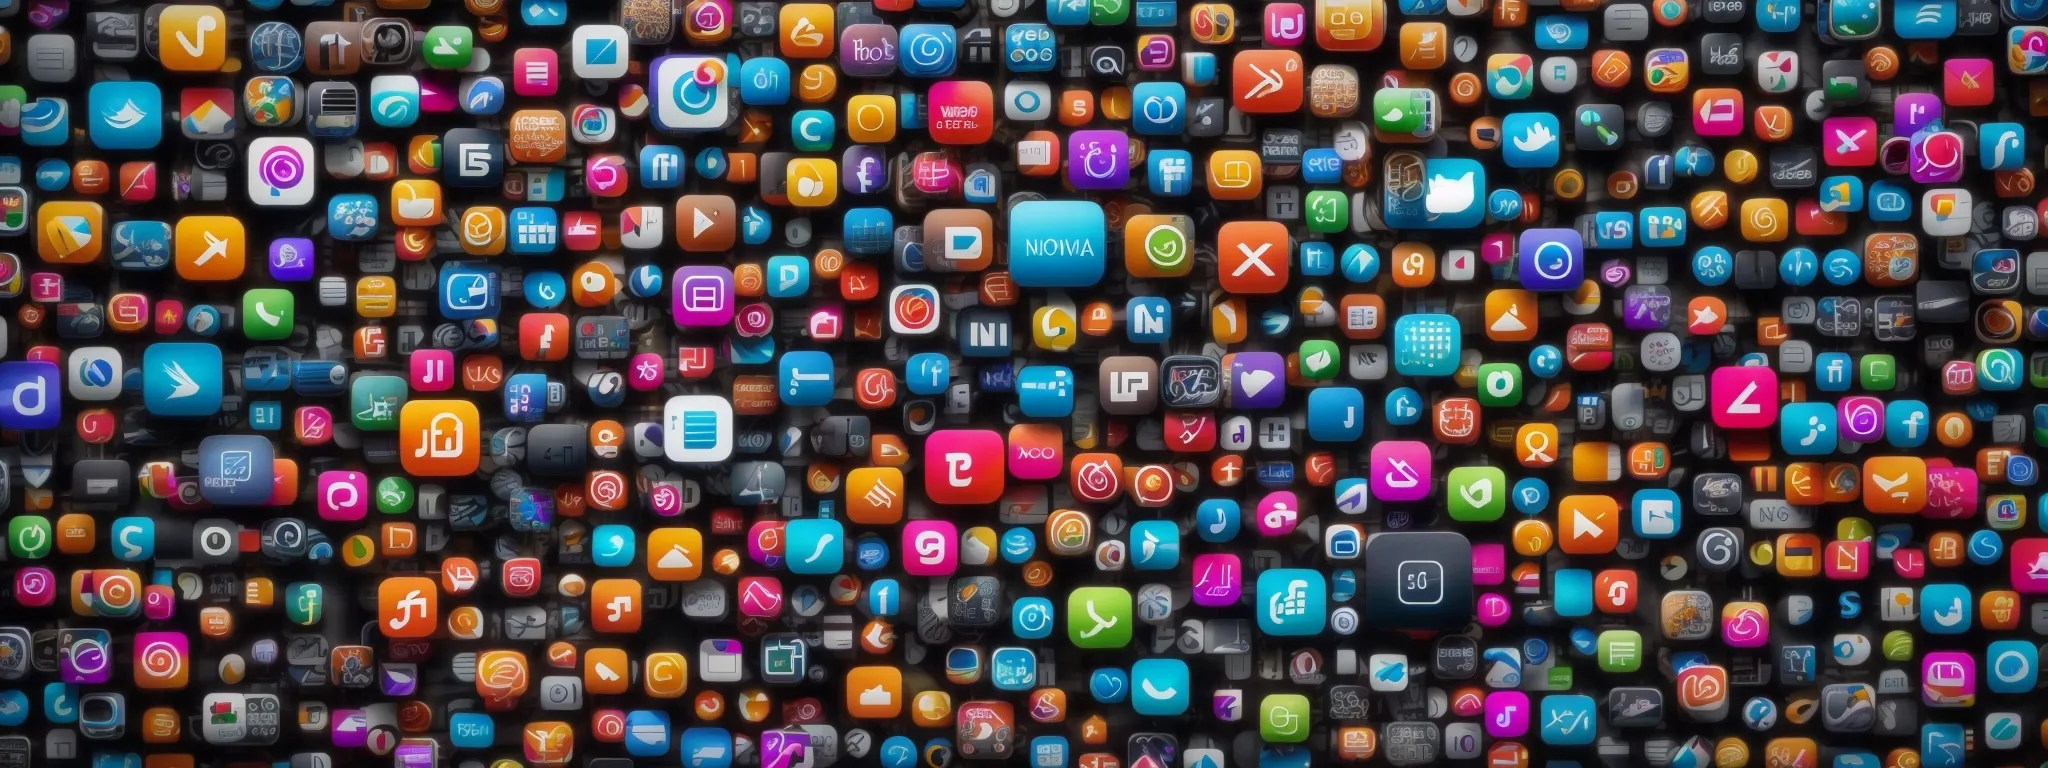 a smartphone displaying an array of colorful app icons on its screen.